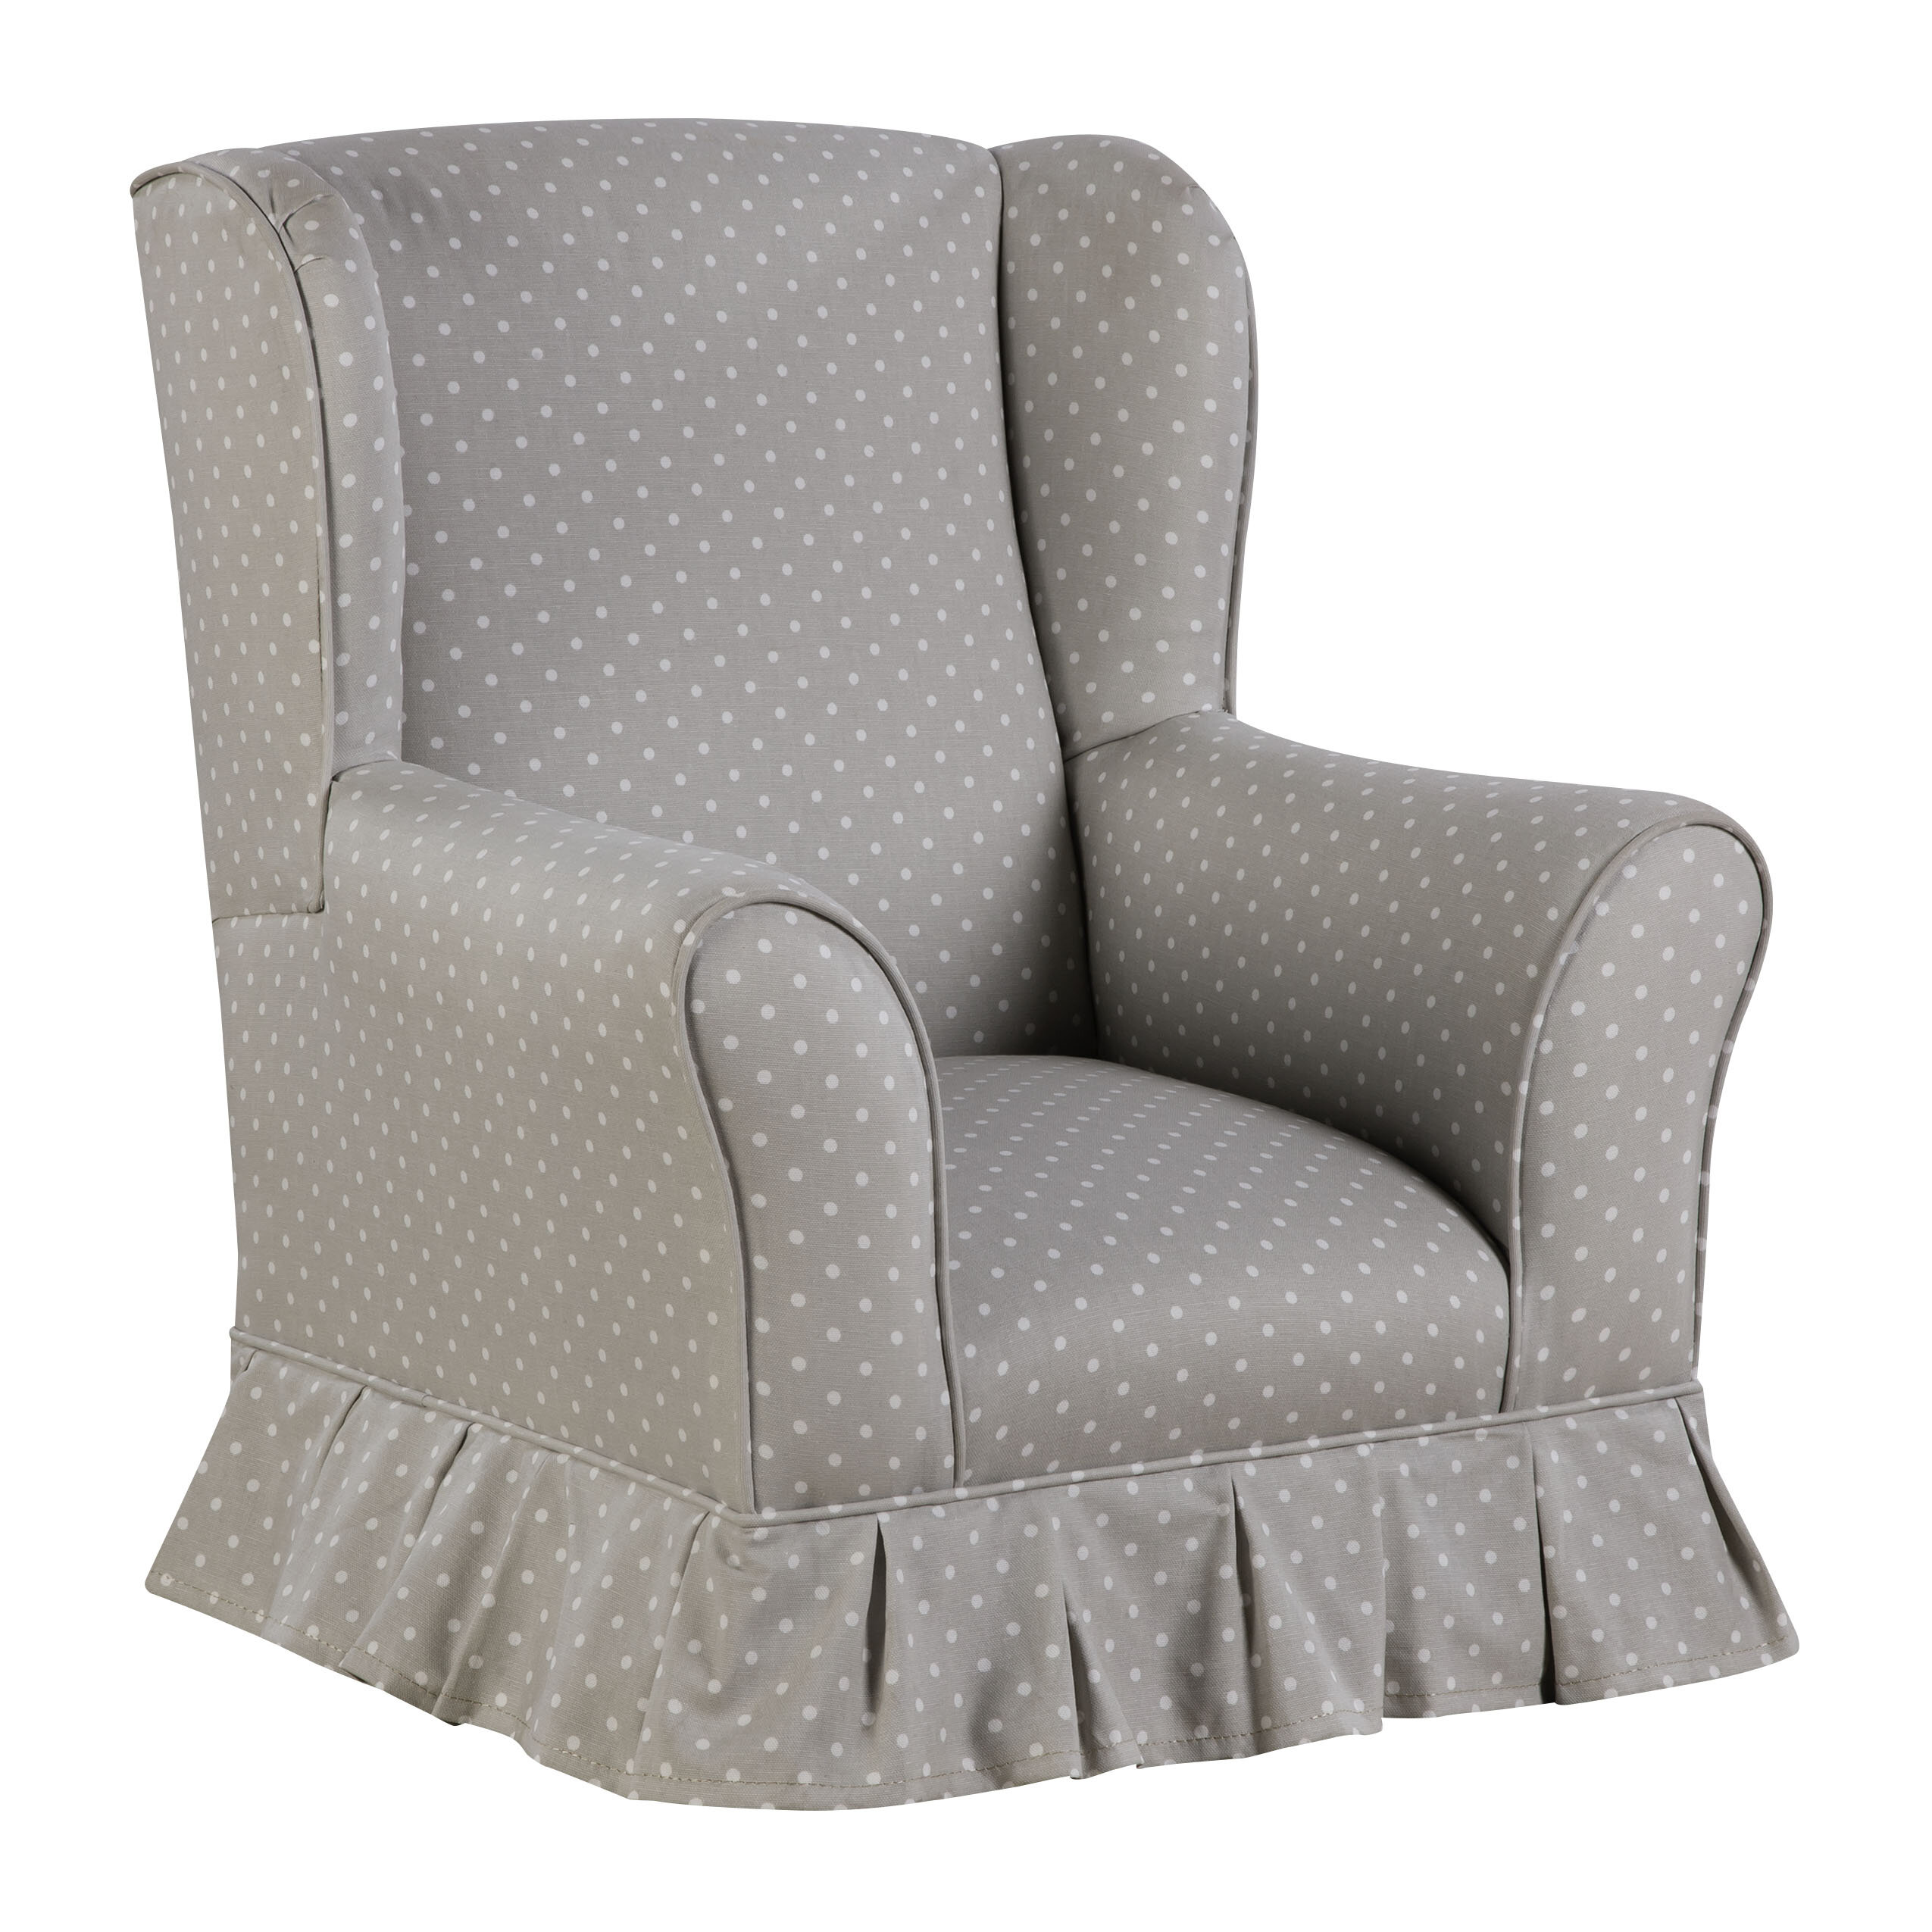 childs wingback chair